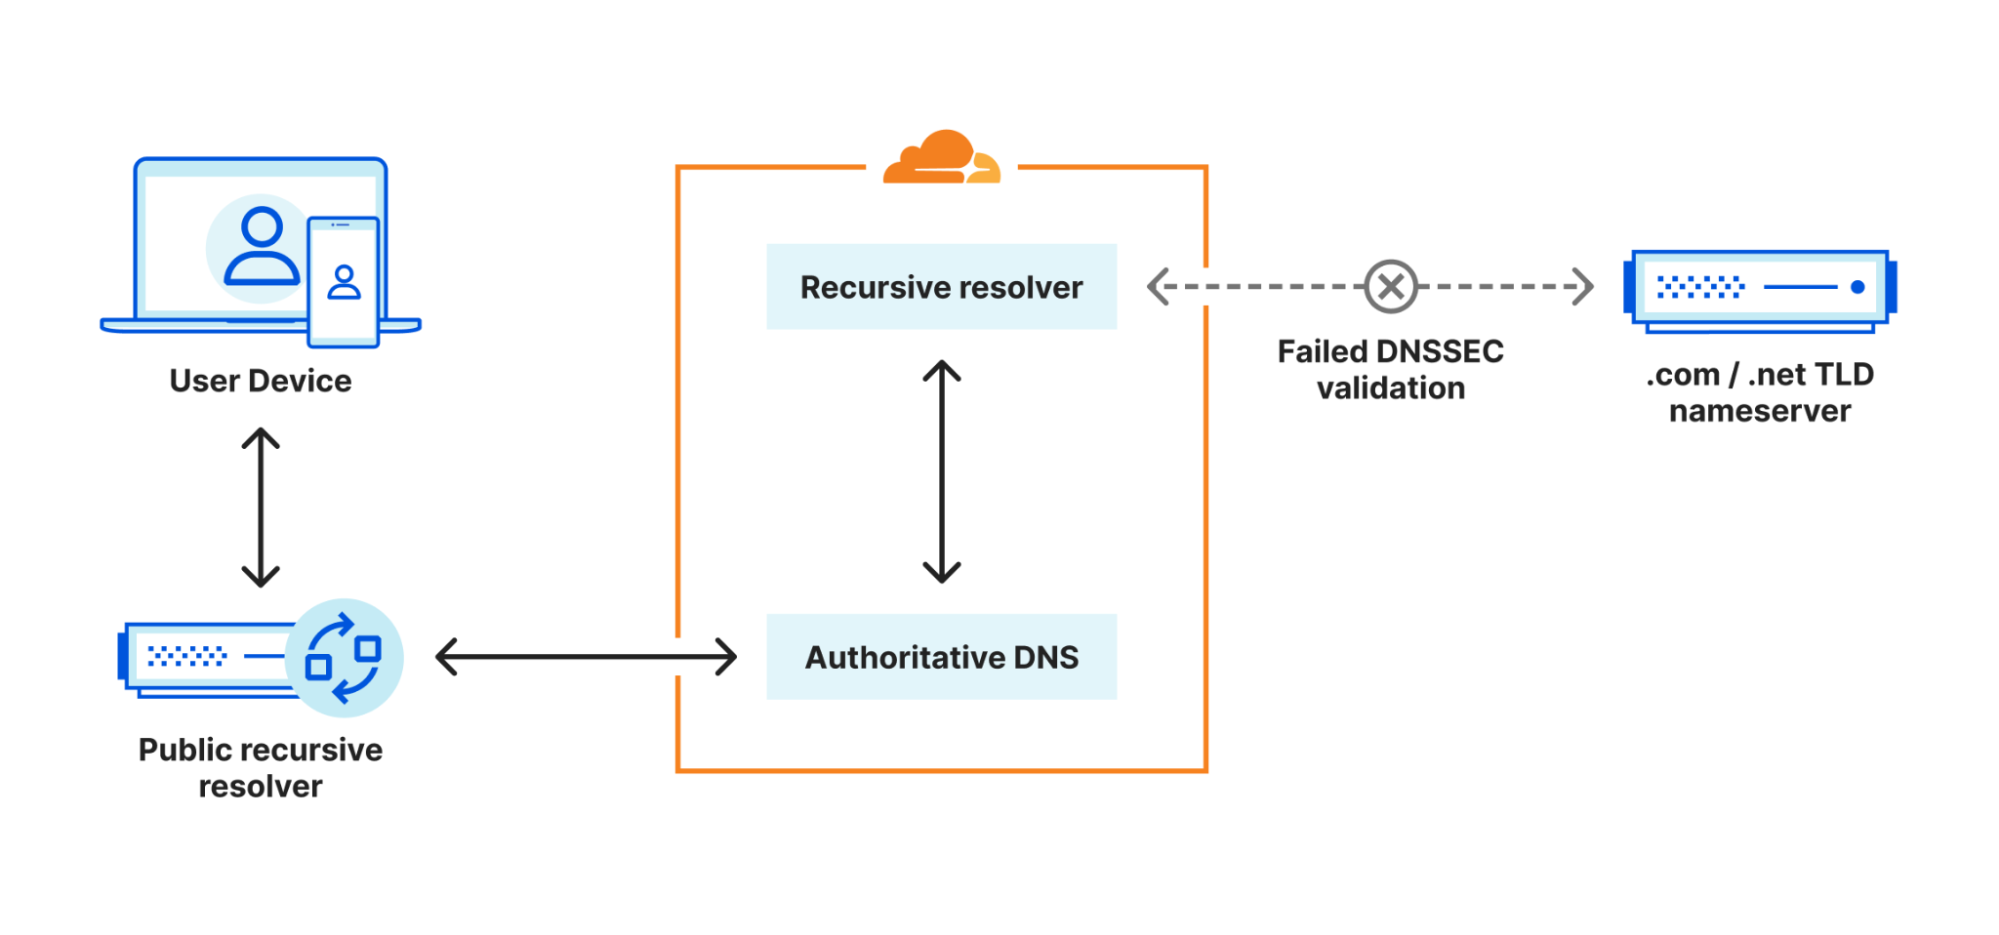 If the query from this resolver fails for whatever reason, our authoritative DNS system will not be able to perform the two scenarios outlined above.